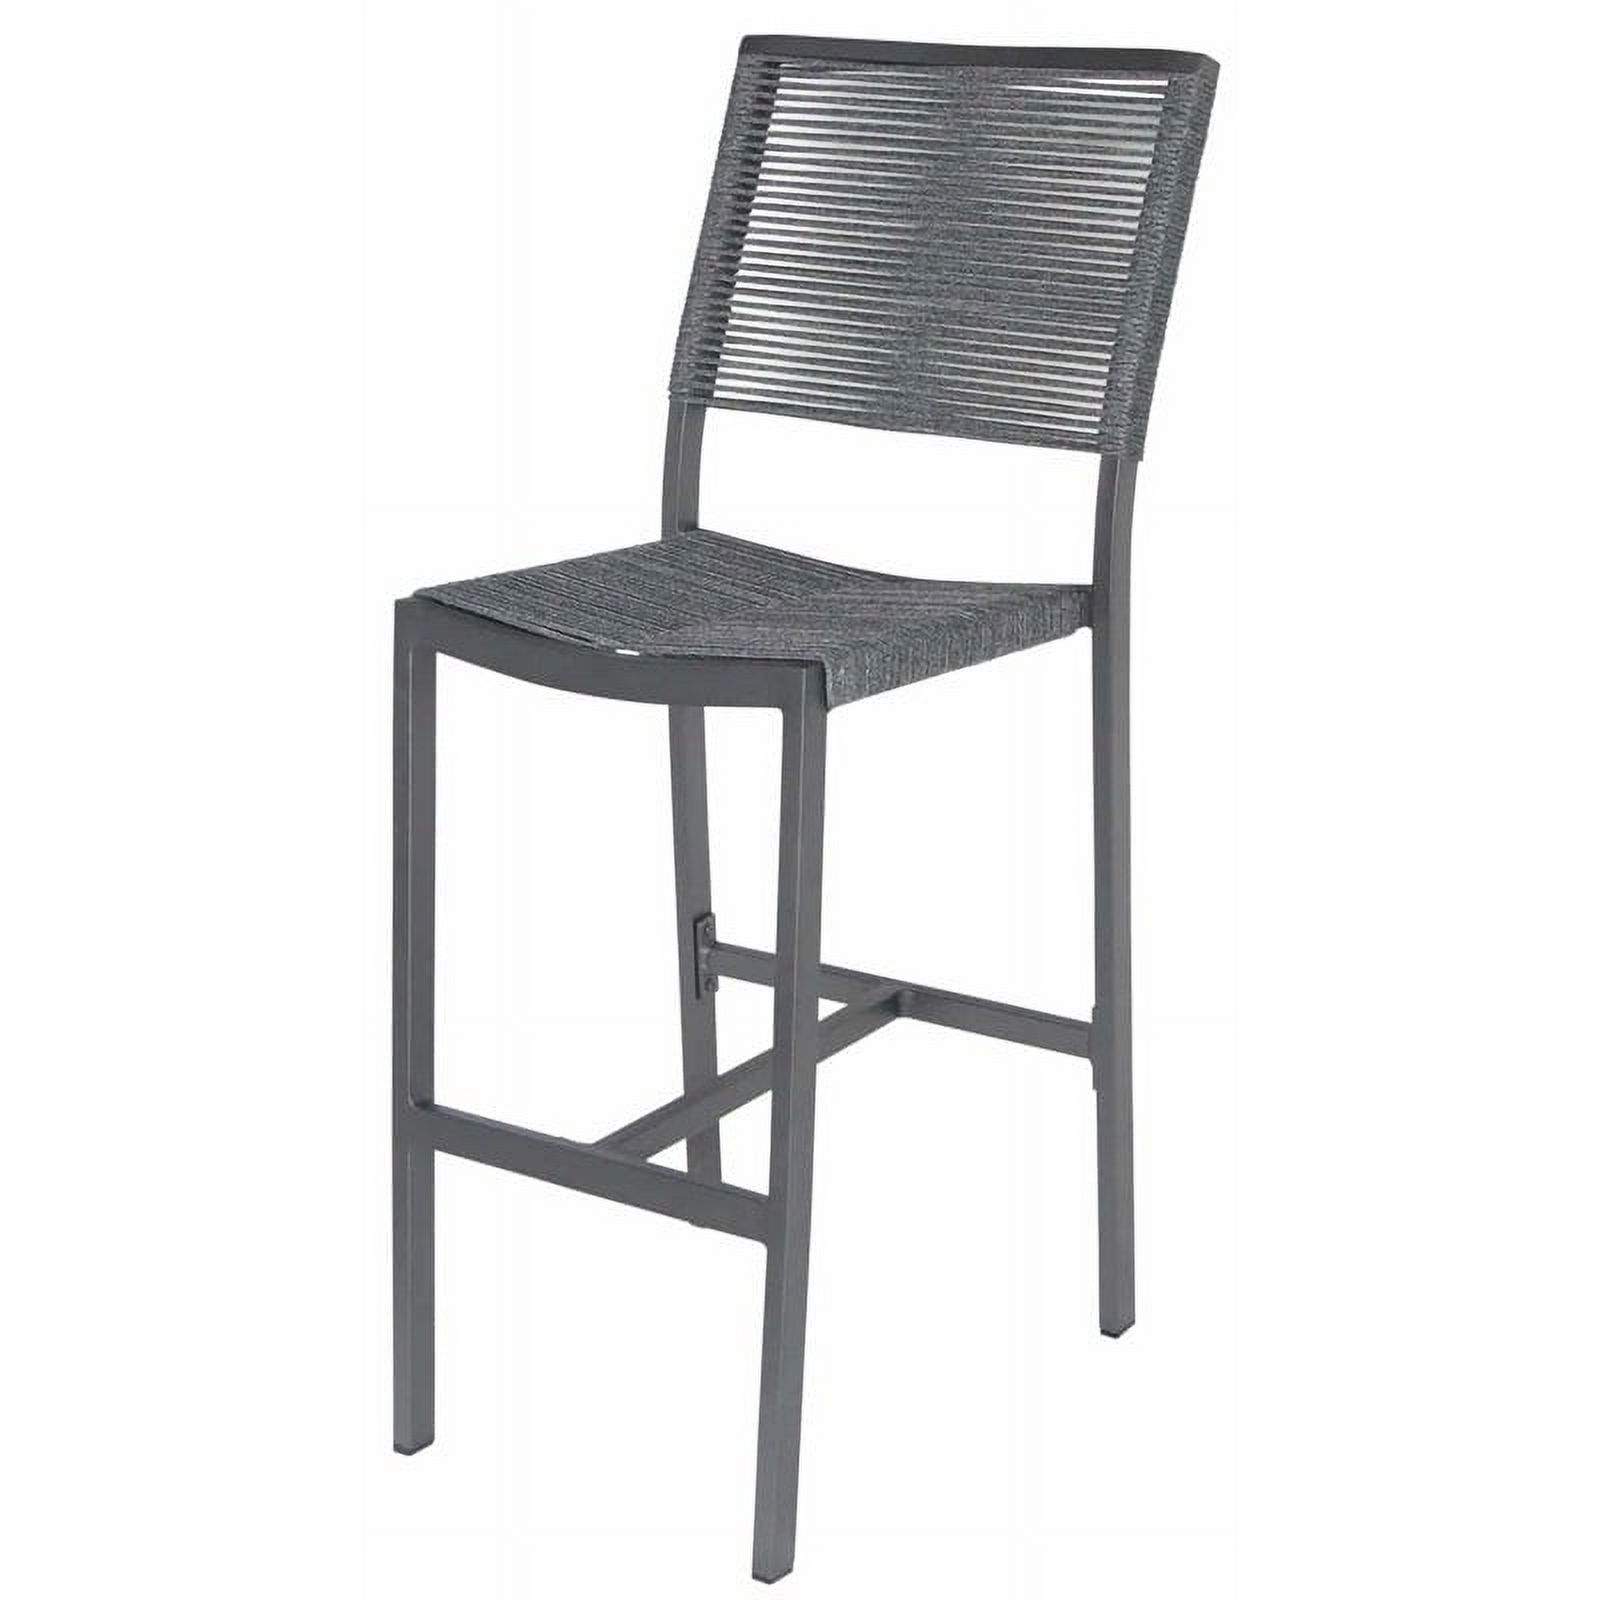 Home Square Aluminum Patio Bar Side Stool in Charcoal Rope - Set of 2 - image 2 of 2